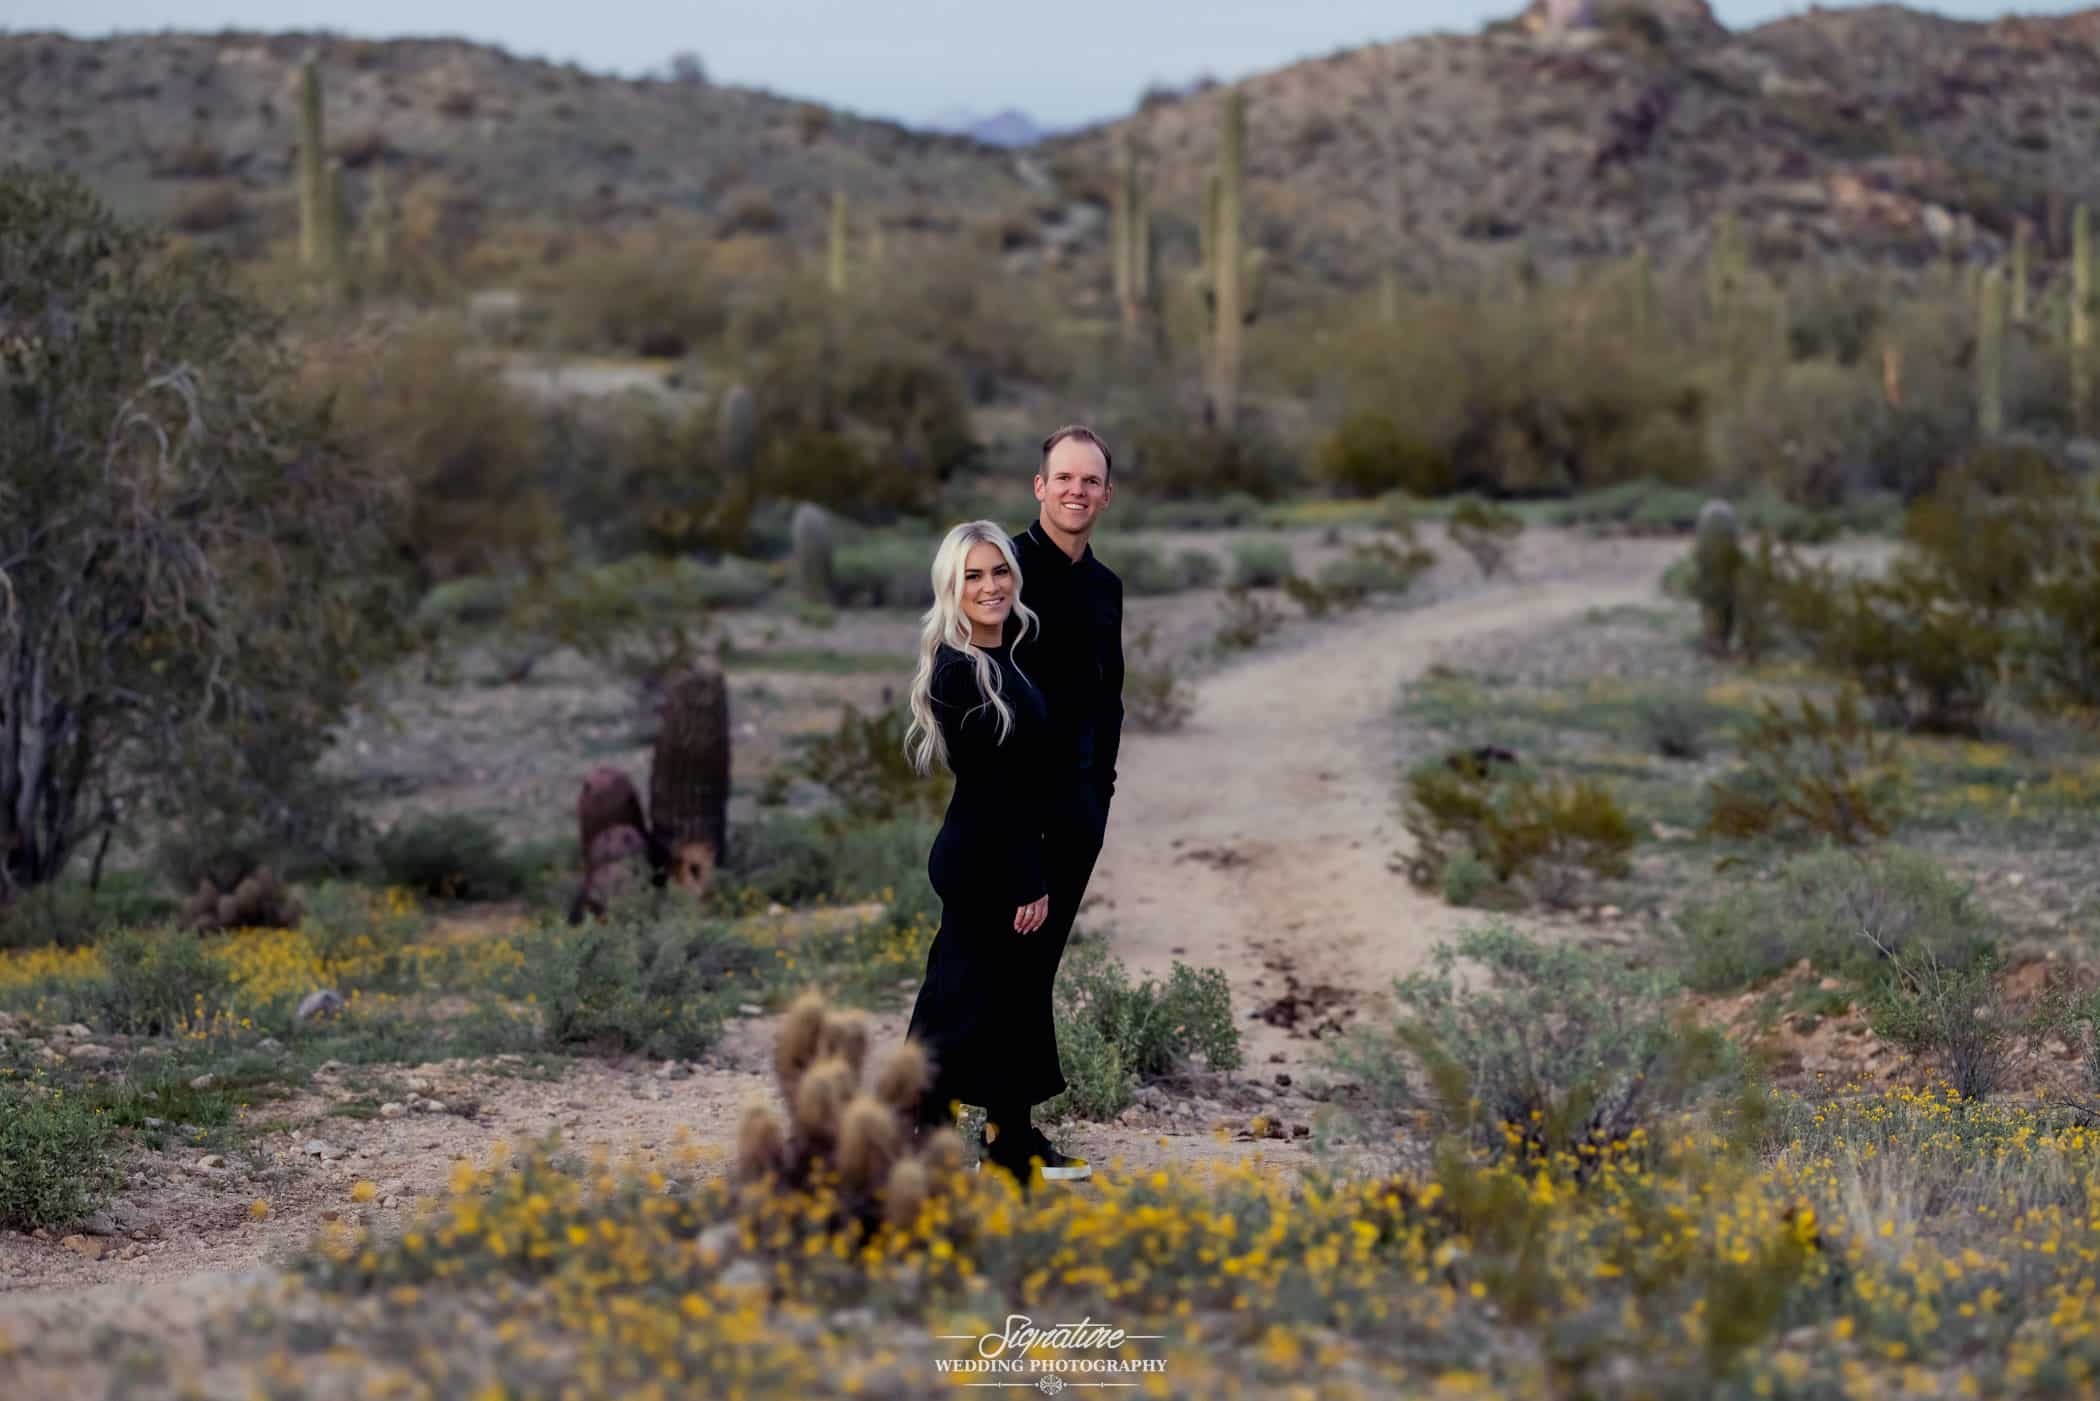 Couple smiling at camera on desert path